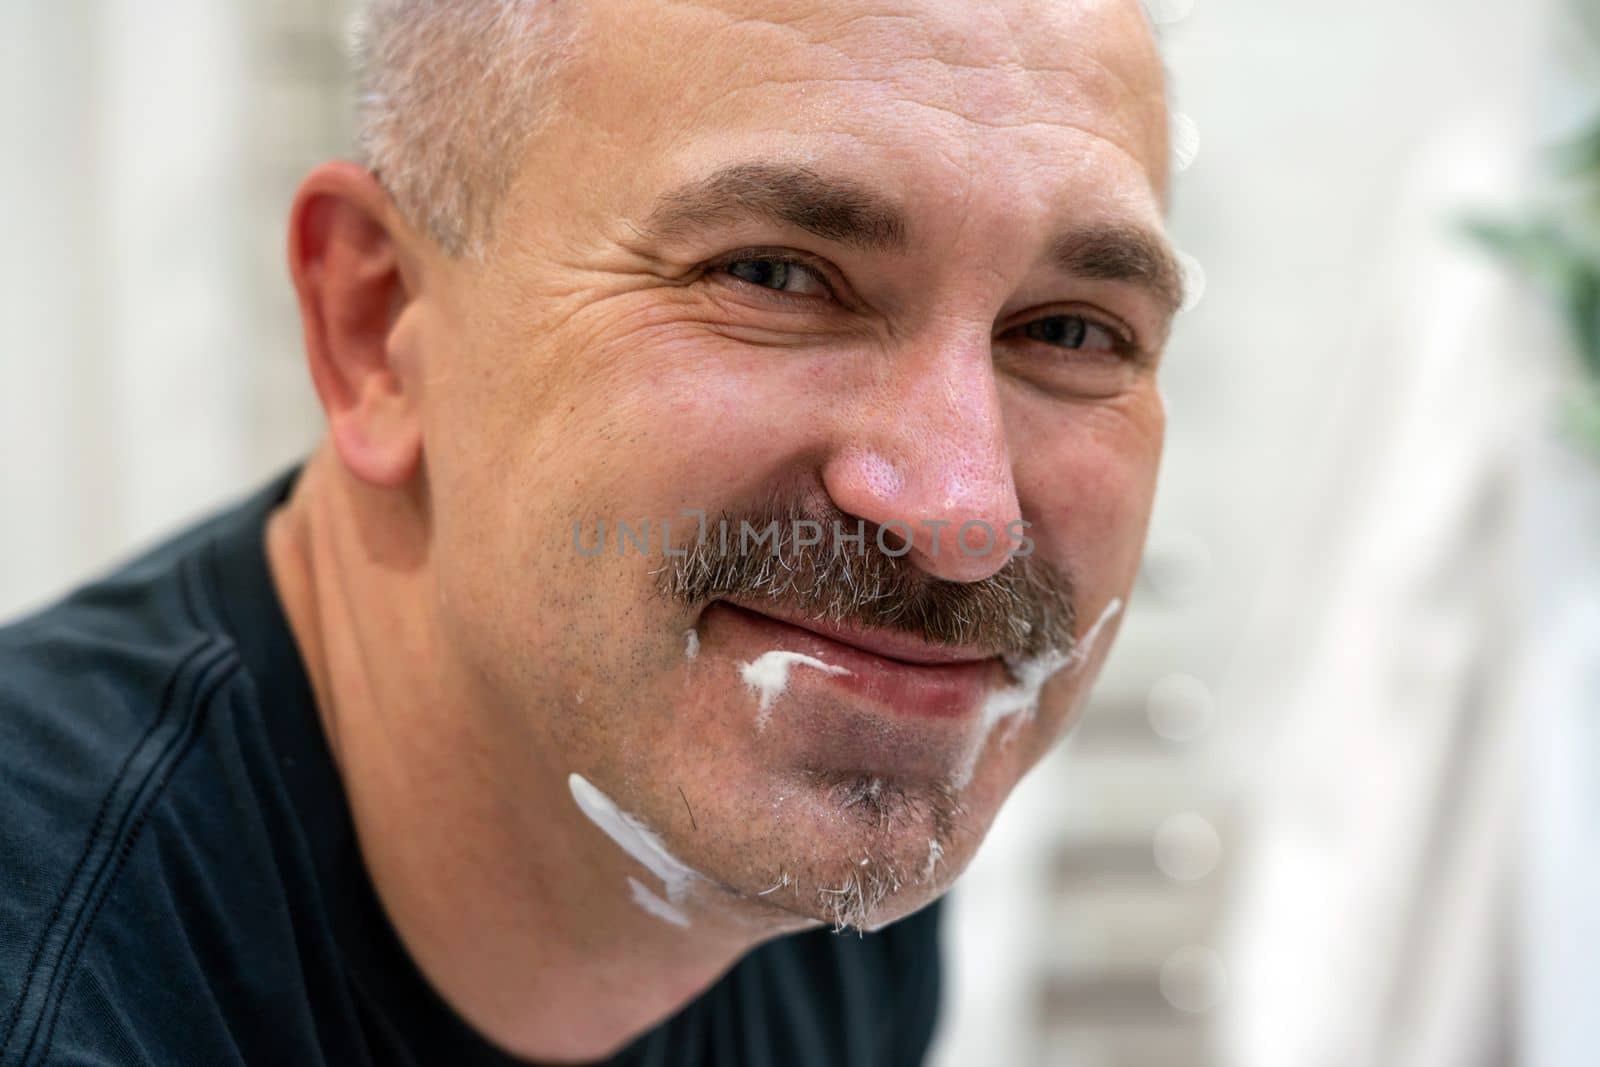 Middle aged handsome man shaving his beard in bathroom by Mariakray